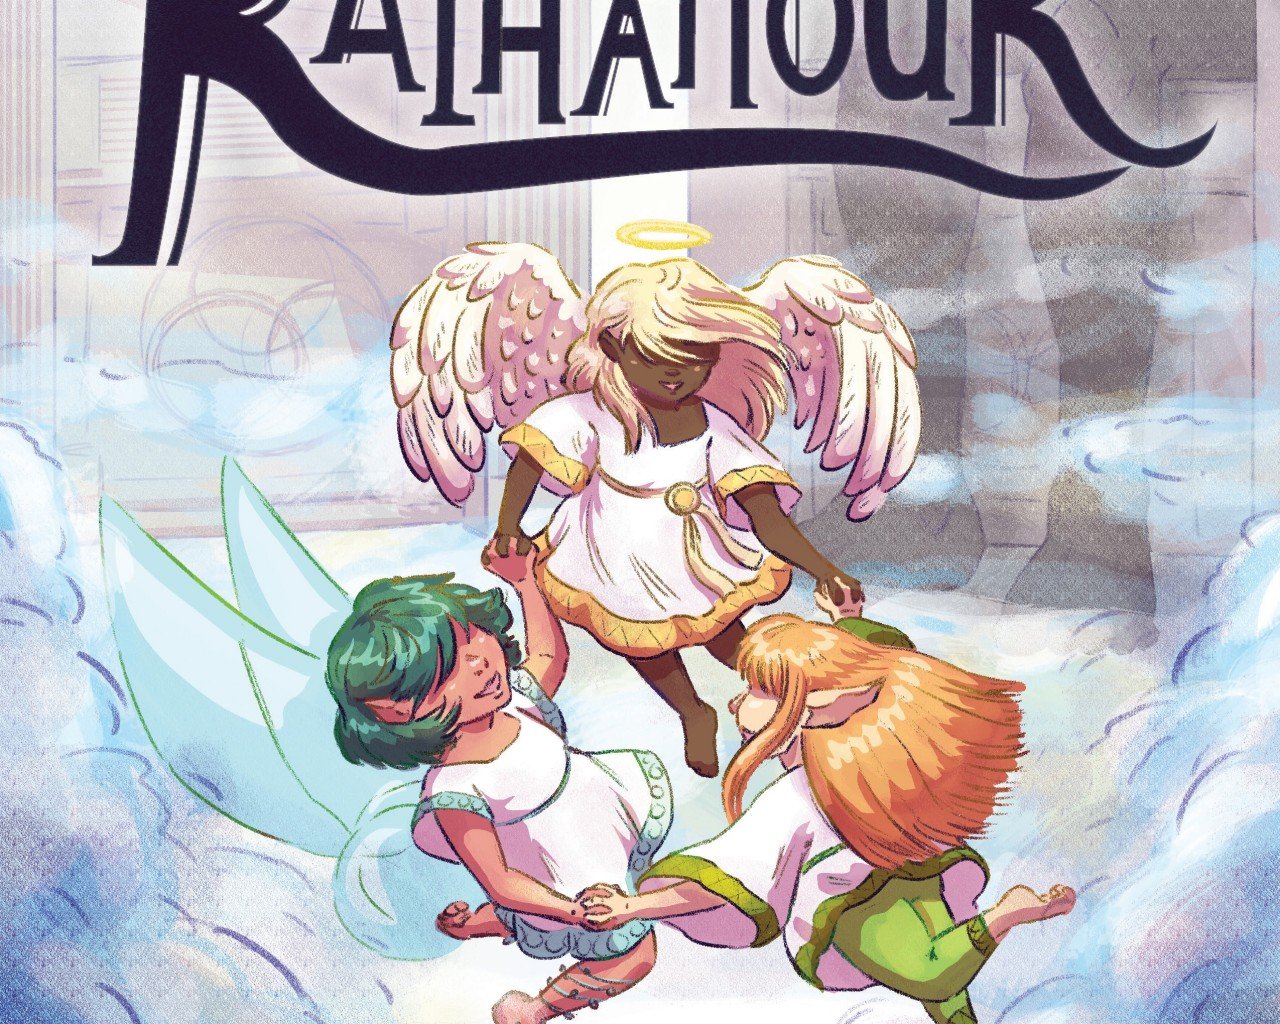 Poster Image for The Legend of Kaihamour